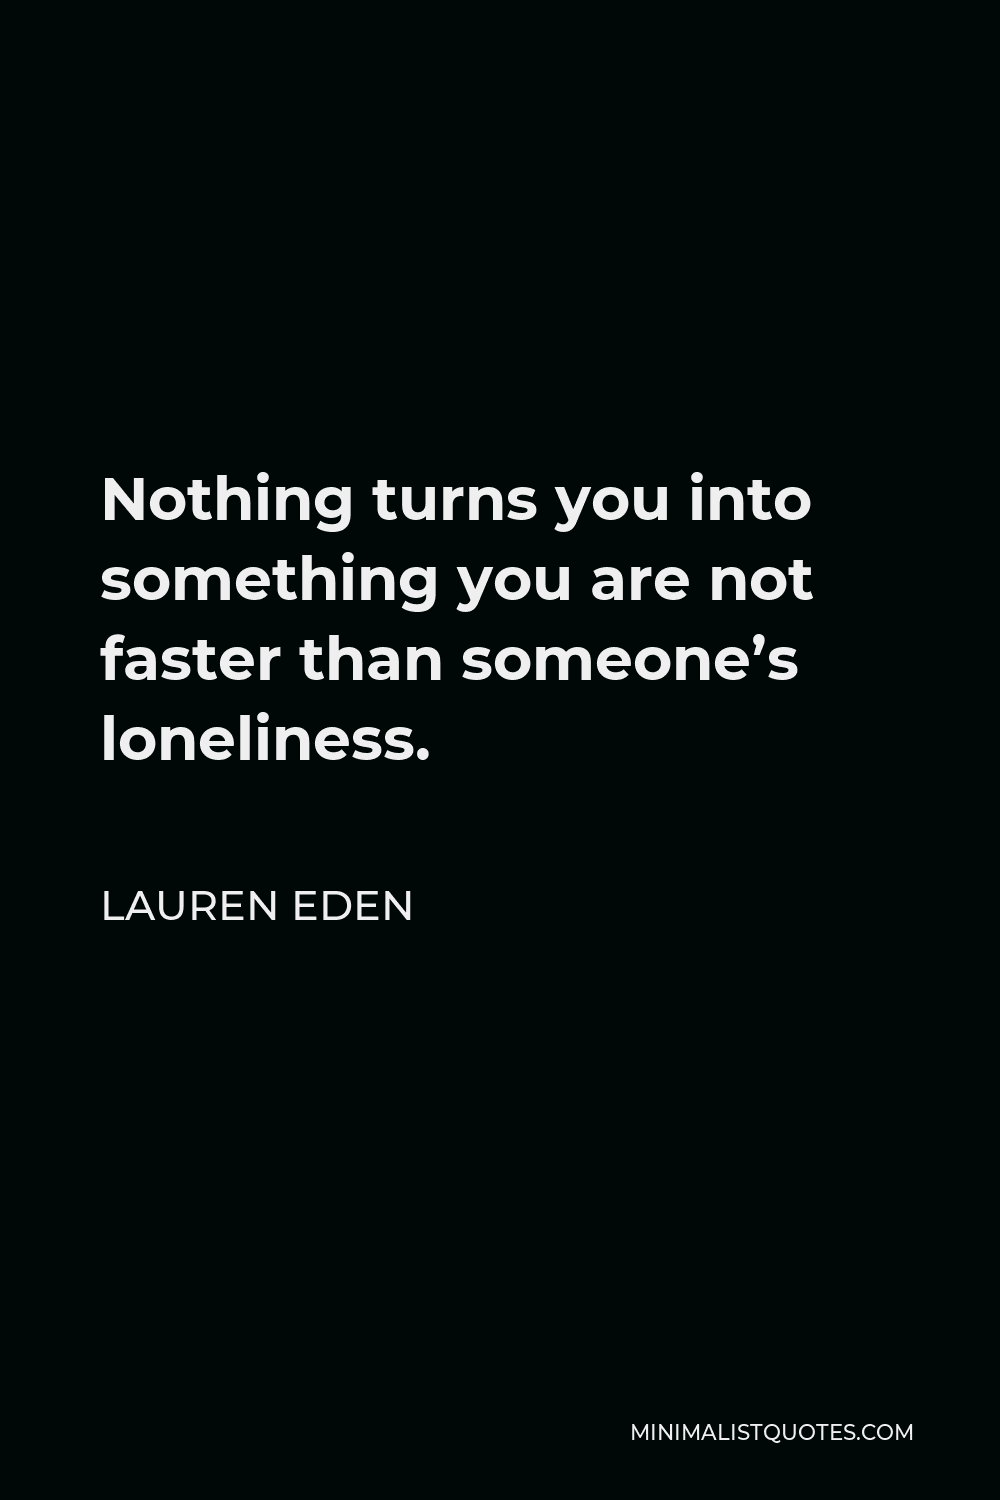 Lauren Eden Quote - Nothing turns you into something you are not faster than someone’s loneliness.